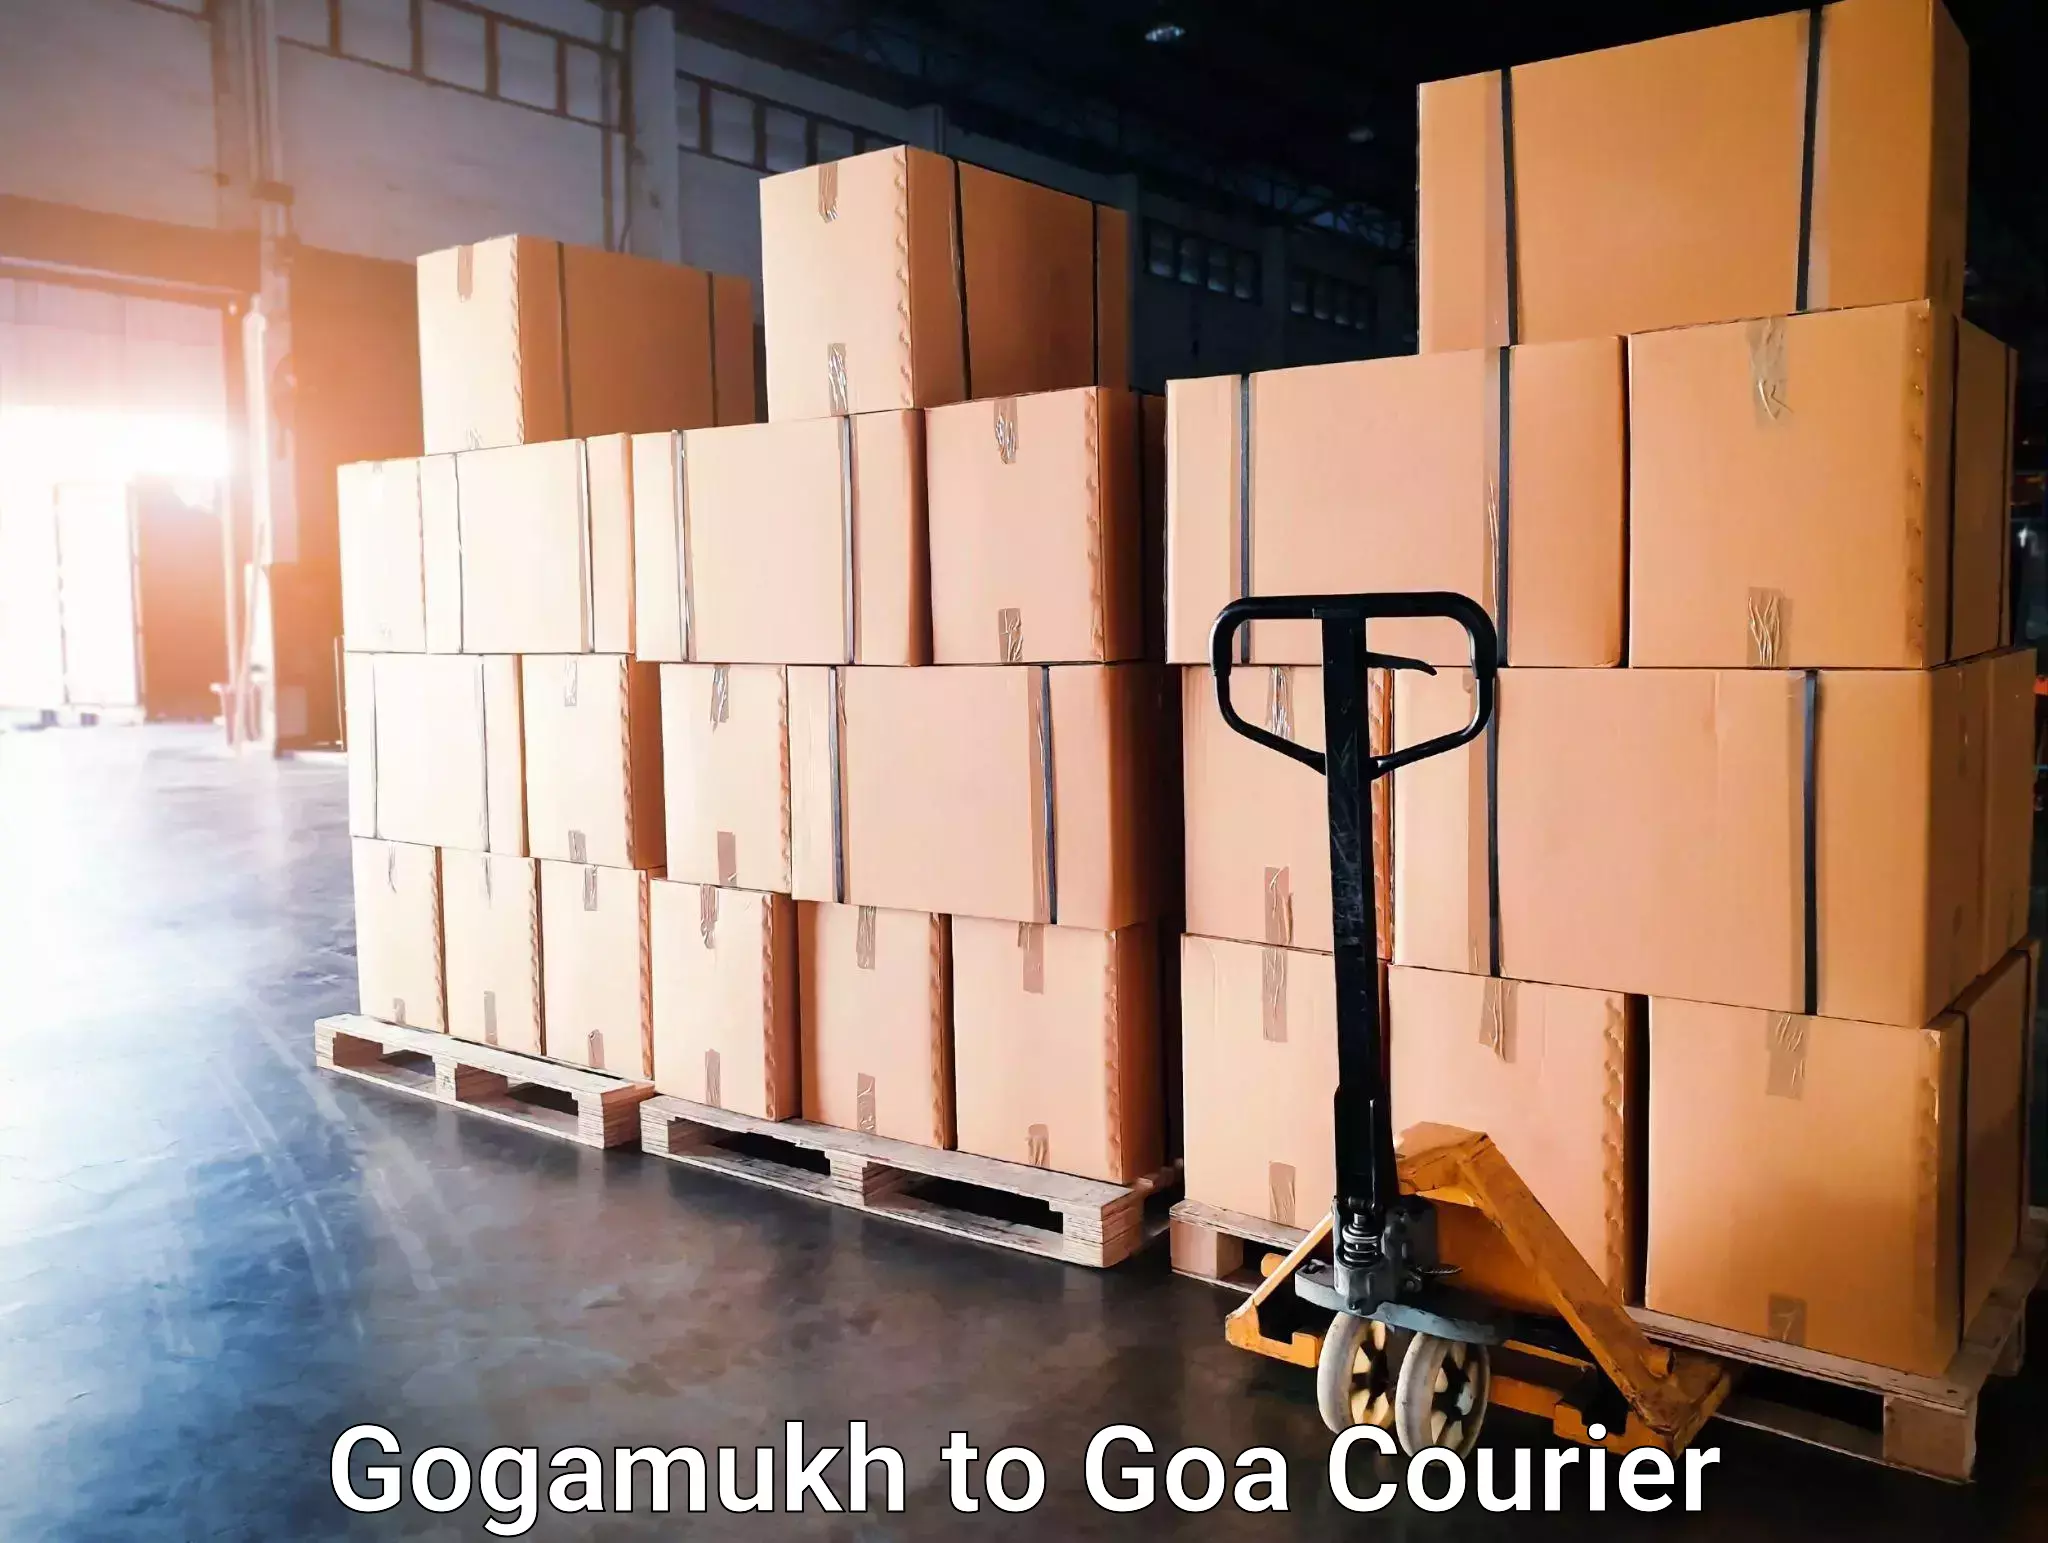 State-of-the-art courier technology Gogamukh to Goa